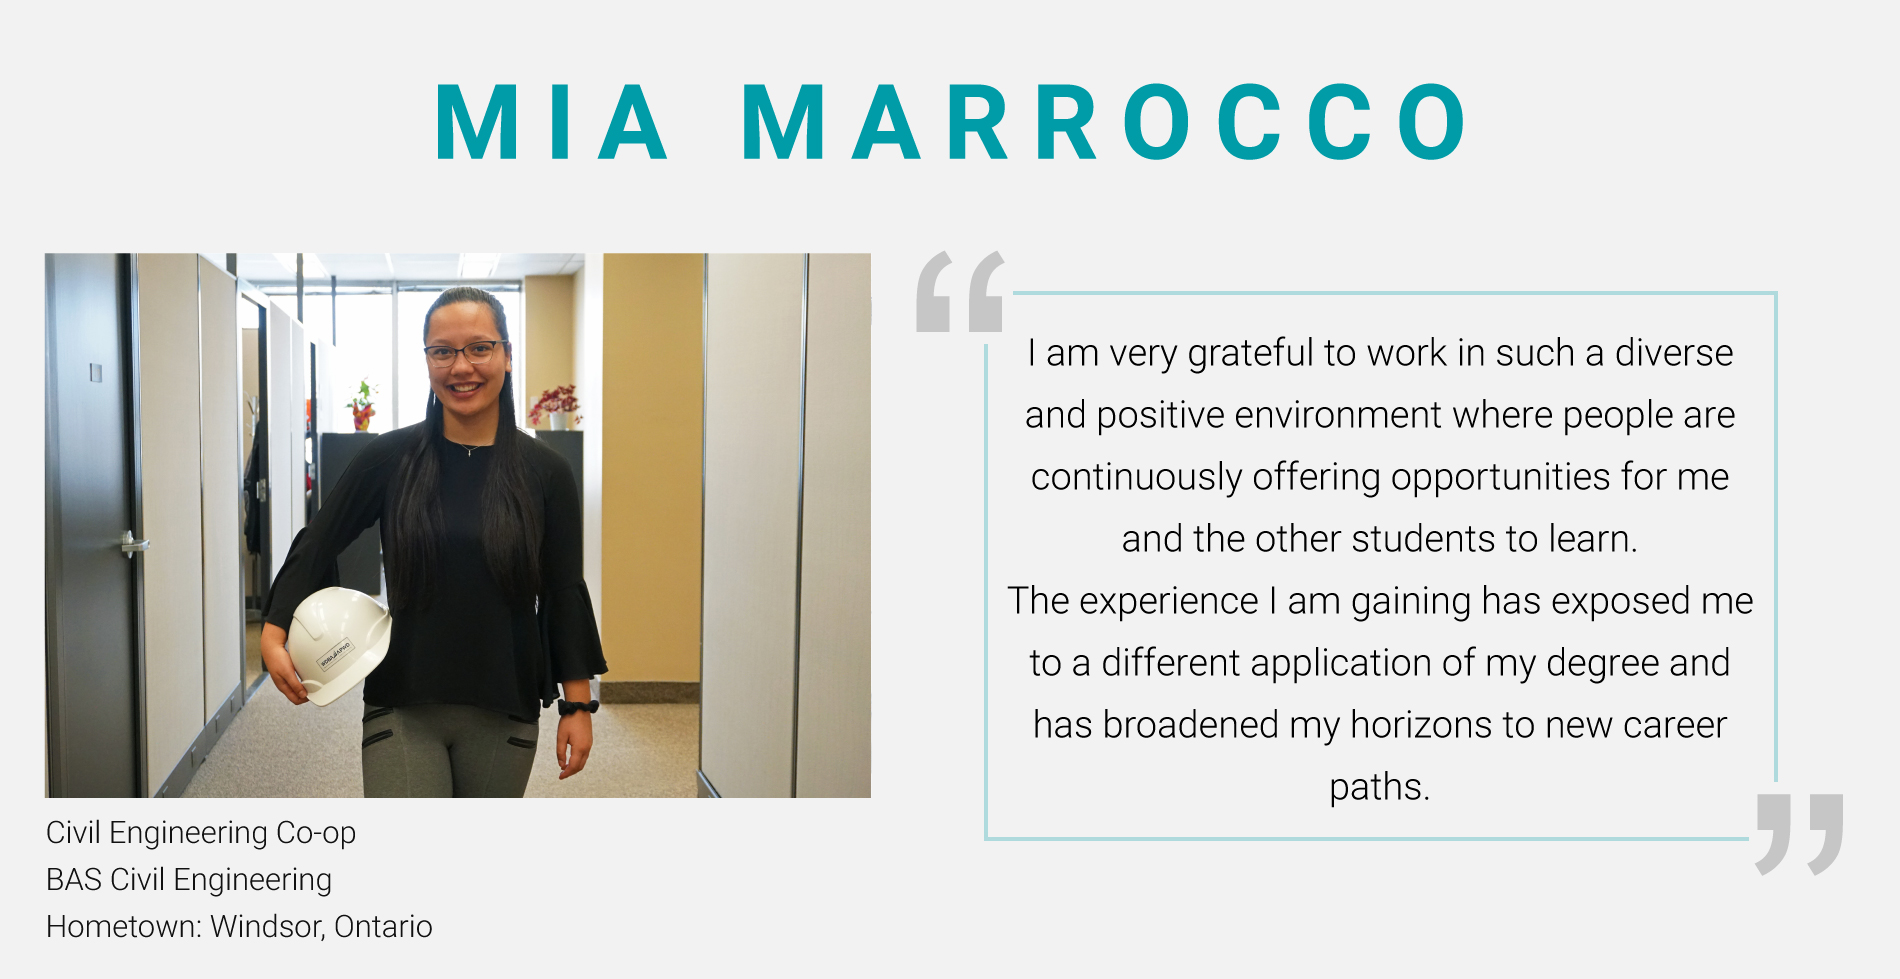 Mia Marrocco, Civil Engineering Co-op. BAS Civil Engineering. "I am very grateful to work in such a diverse and positive environment where people are continuously offering opportunities for me and the other students to learn. The experience I am gaining has exposed me to a different application of my degree and has broadened my horizons to new career paths."